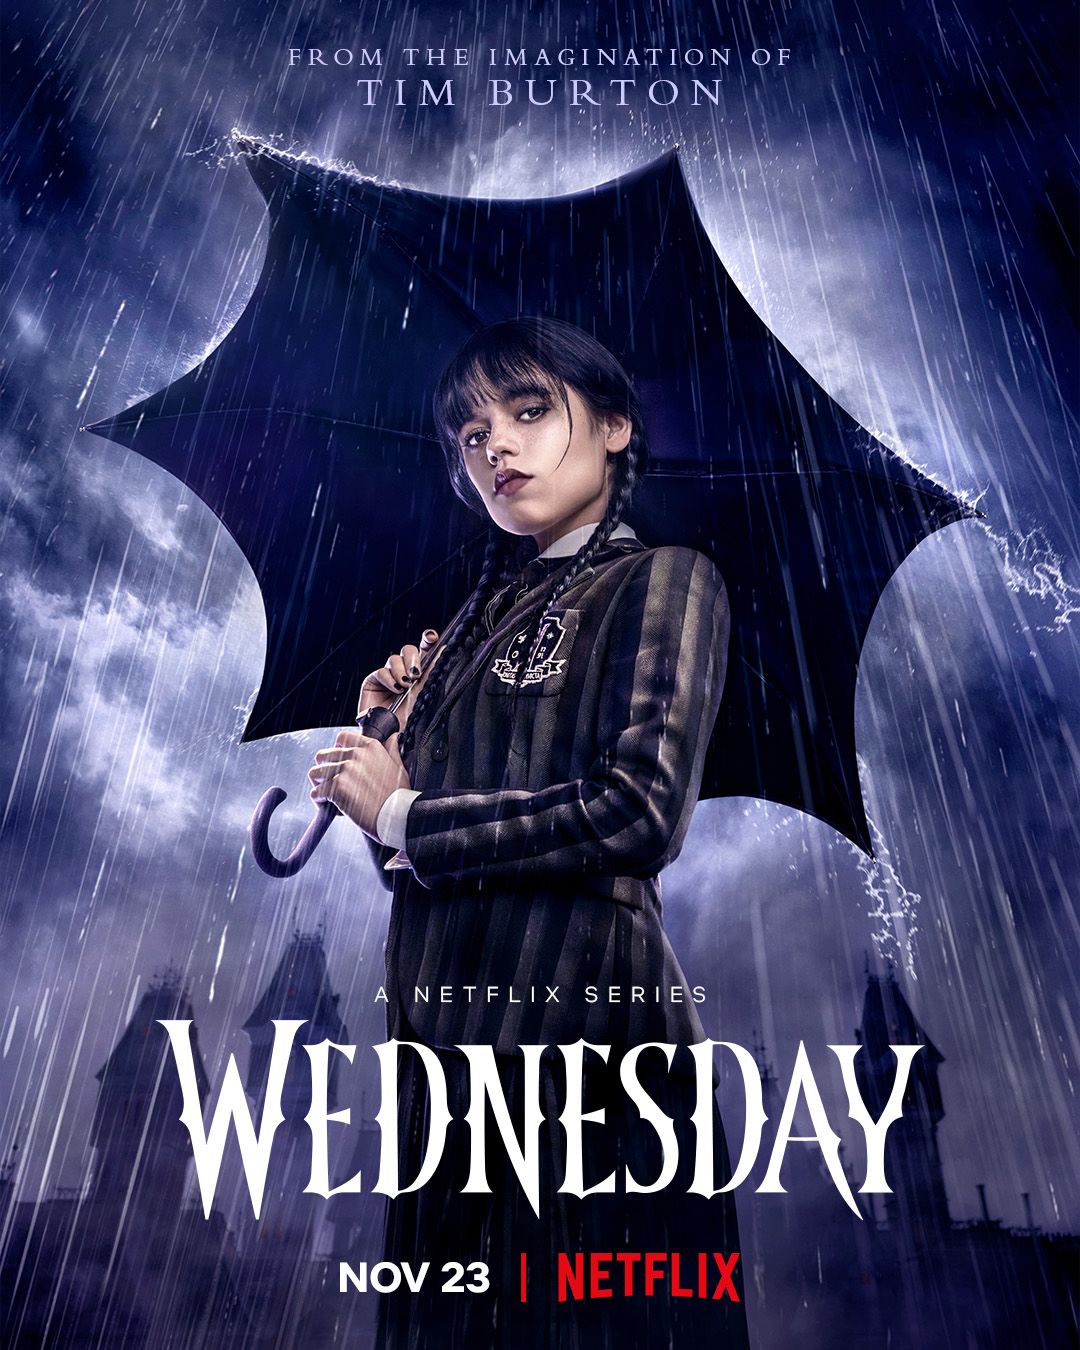 Wednesday Poster Reveals Addams Family Spinoff Release Date